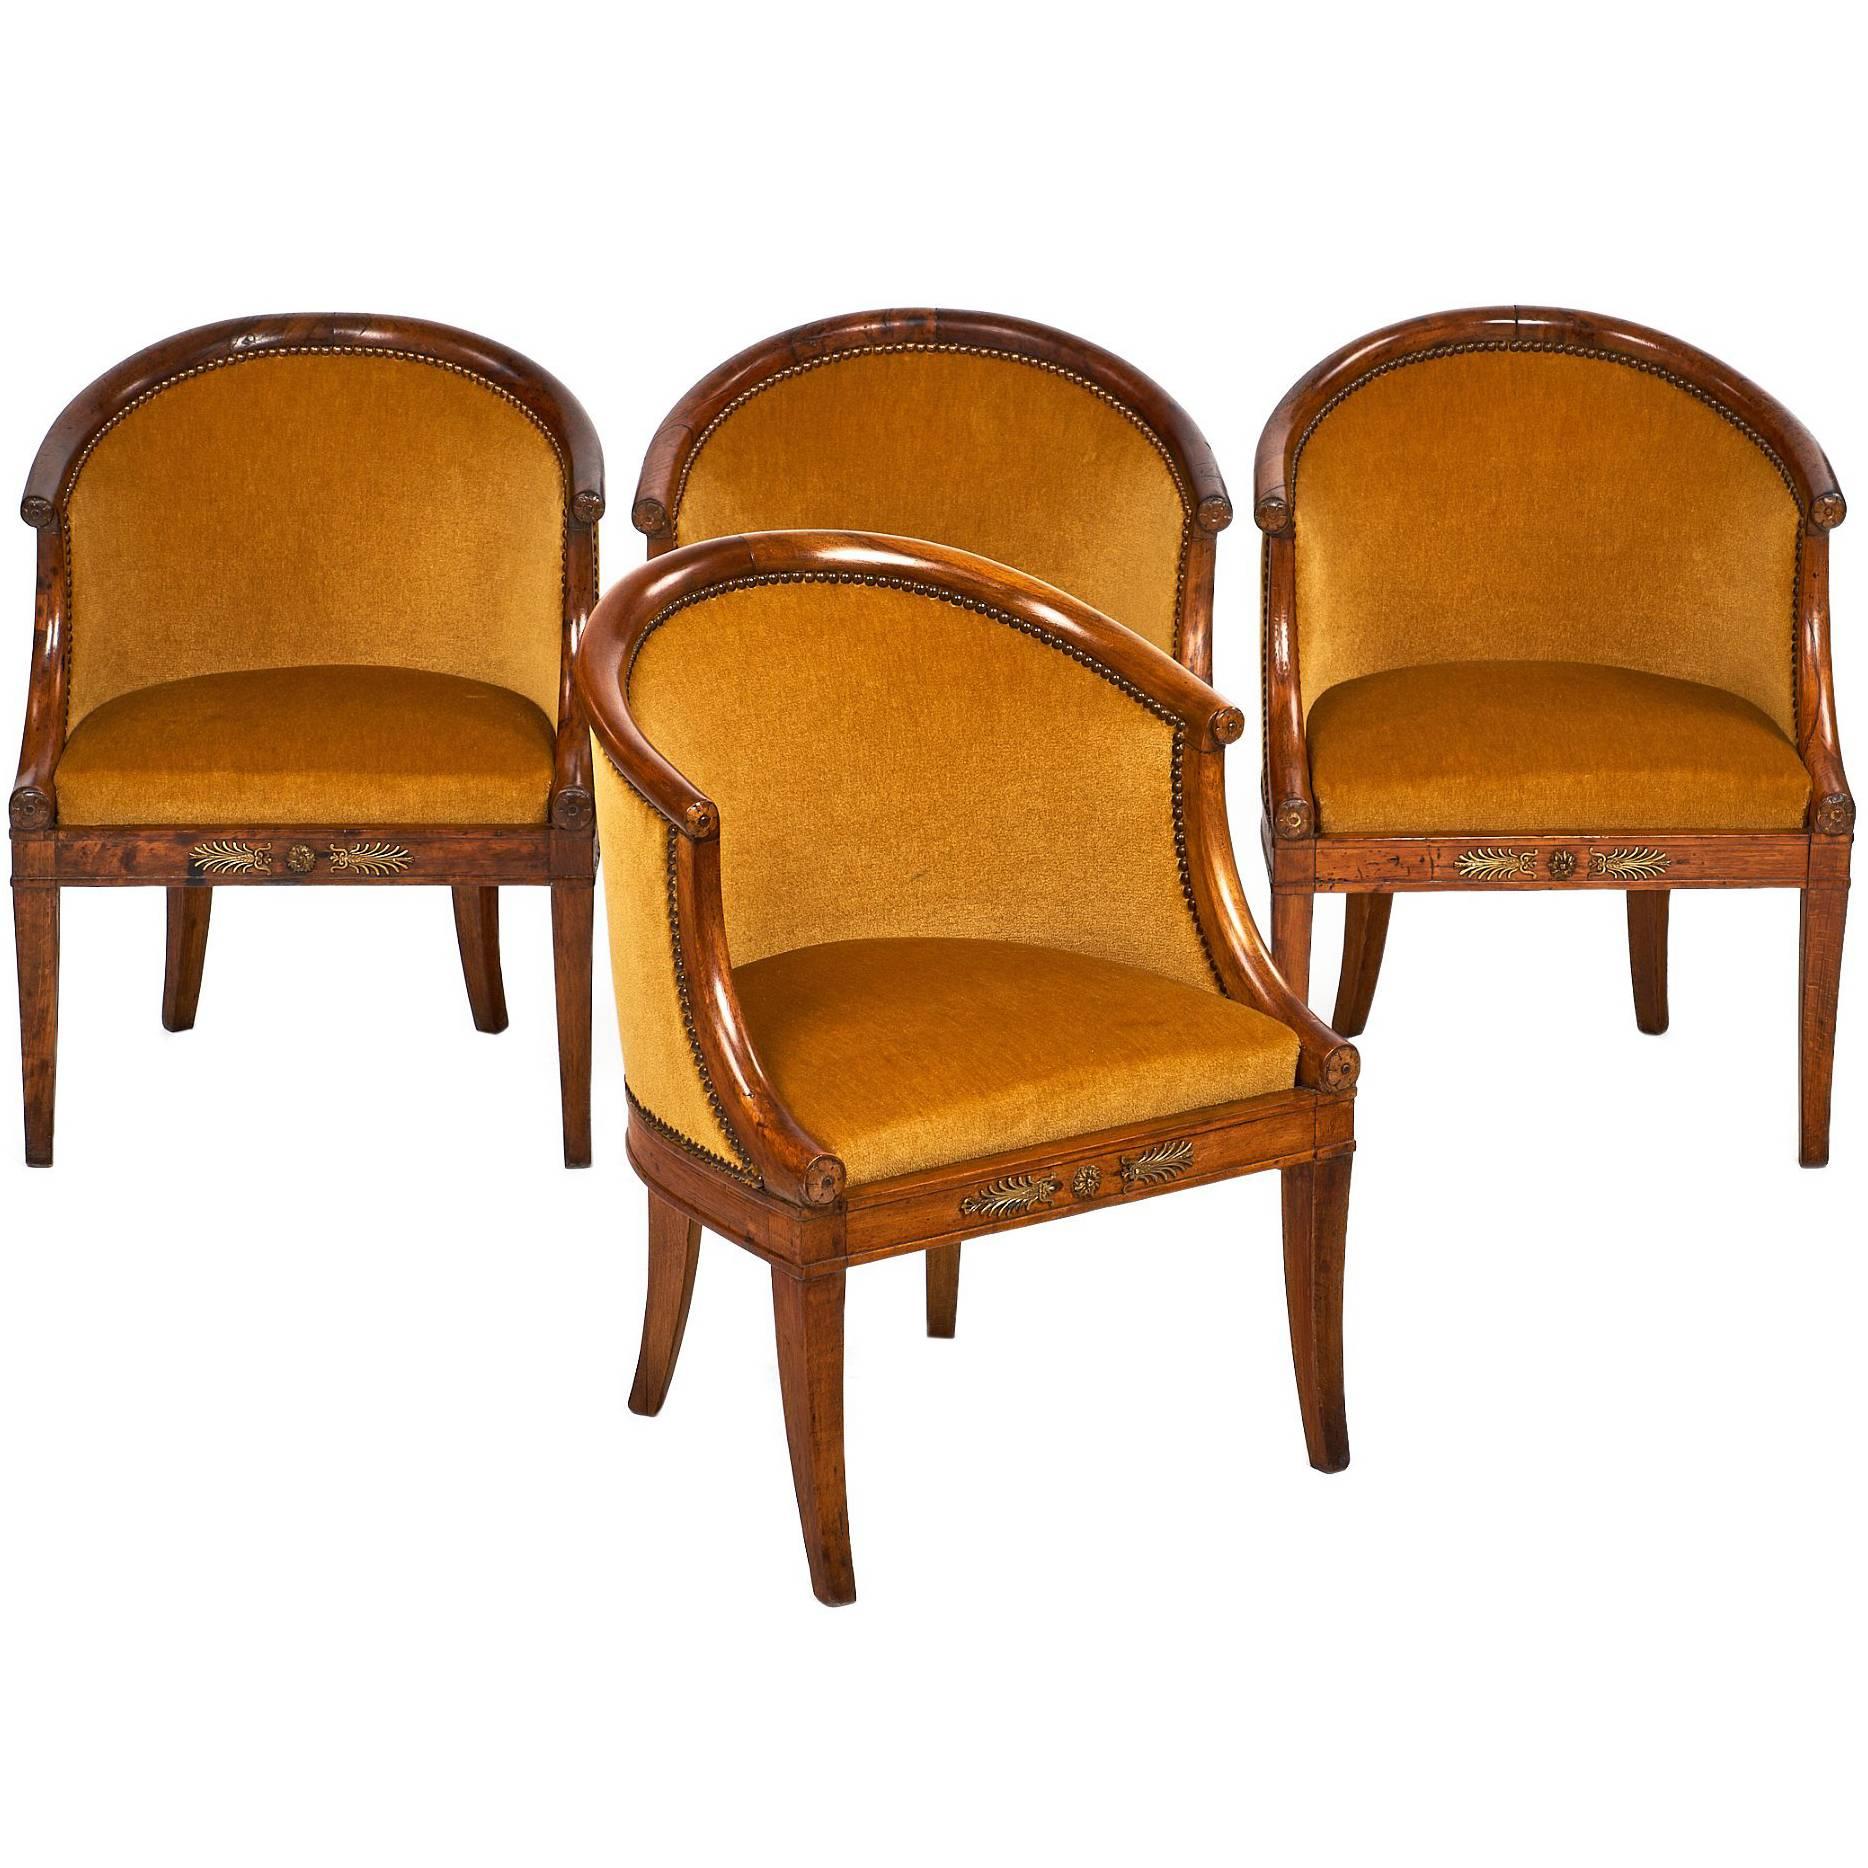 French Antique Empire Style Barrel Chairs